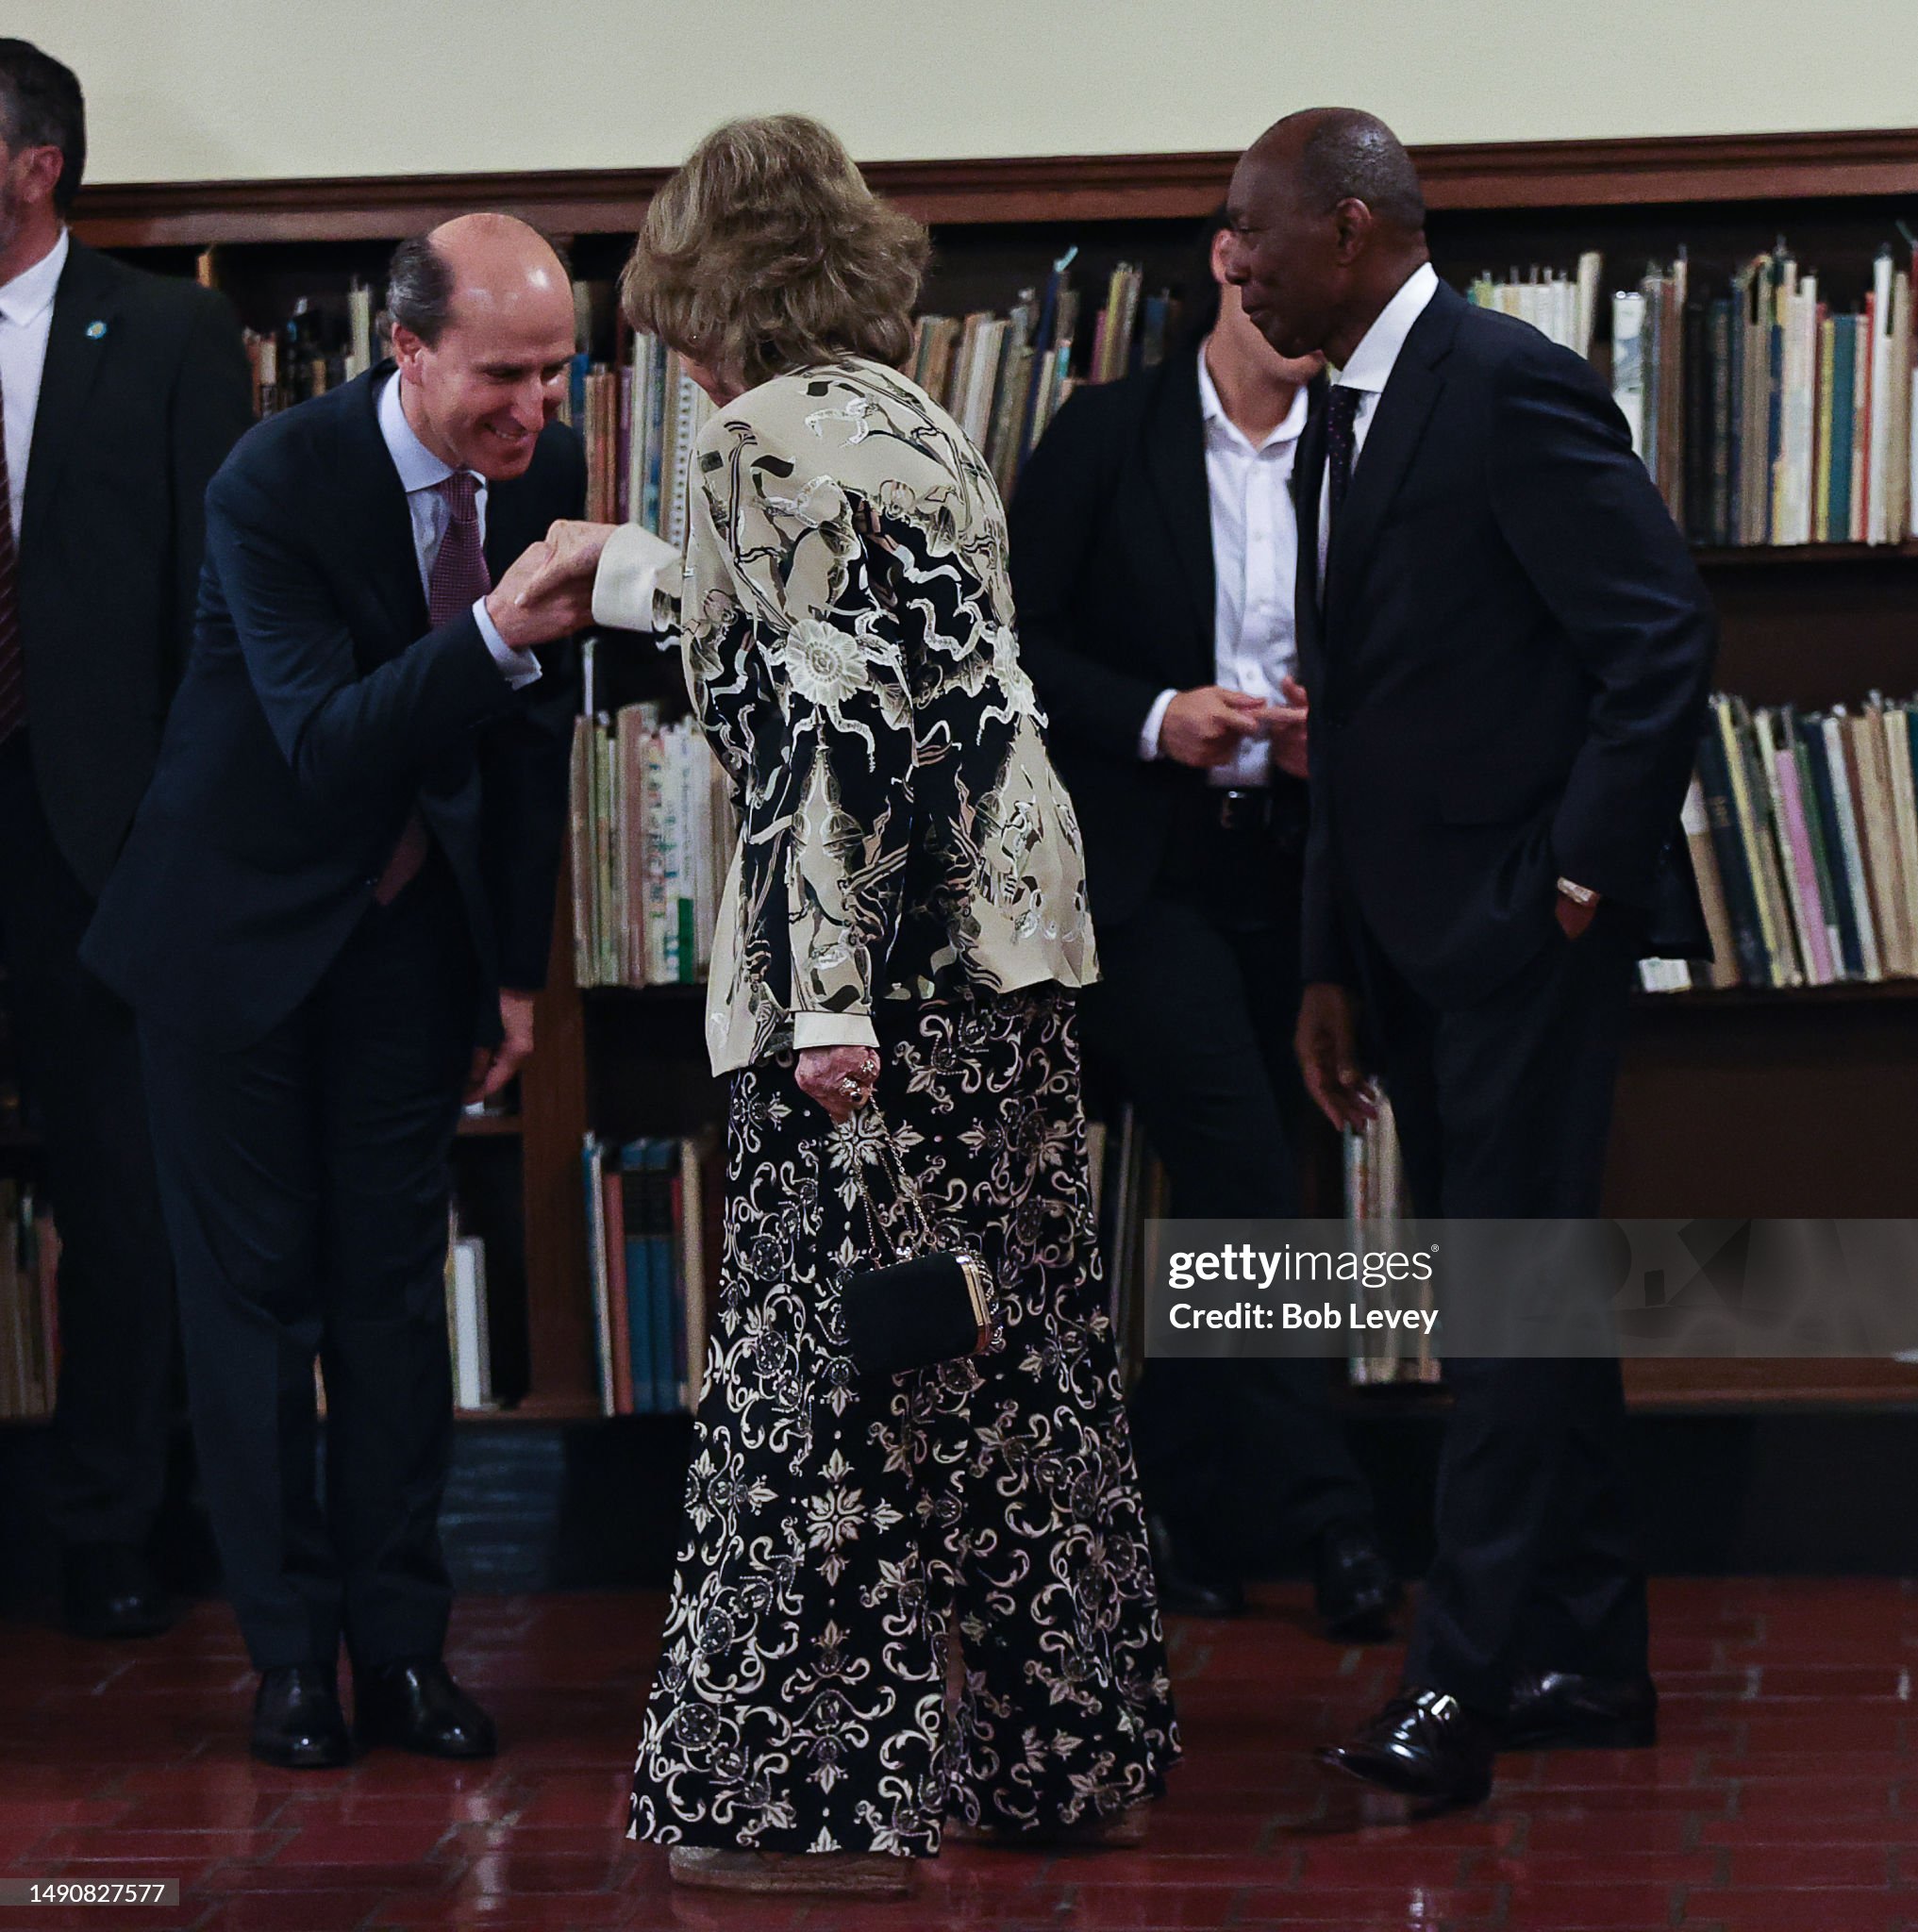 queen-sofia-of-spain-meets-with-guests-at-julia-ideson-building-on-may-16-2023-in-houston-texas.jpg